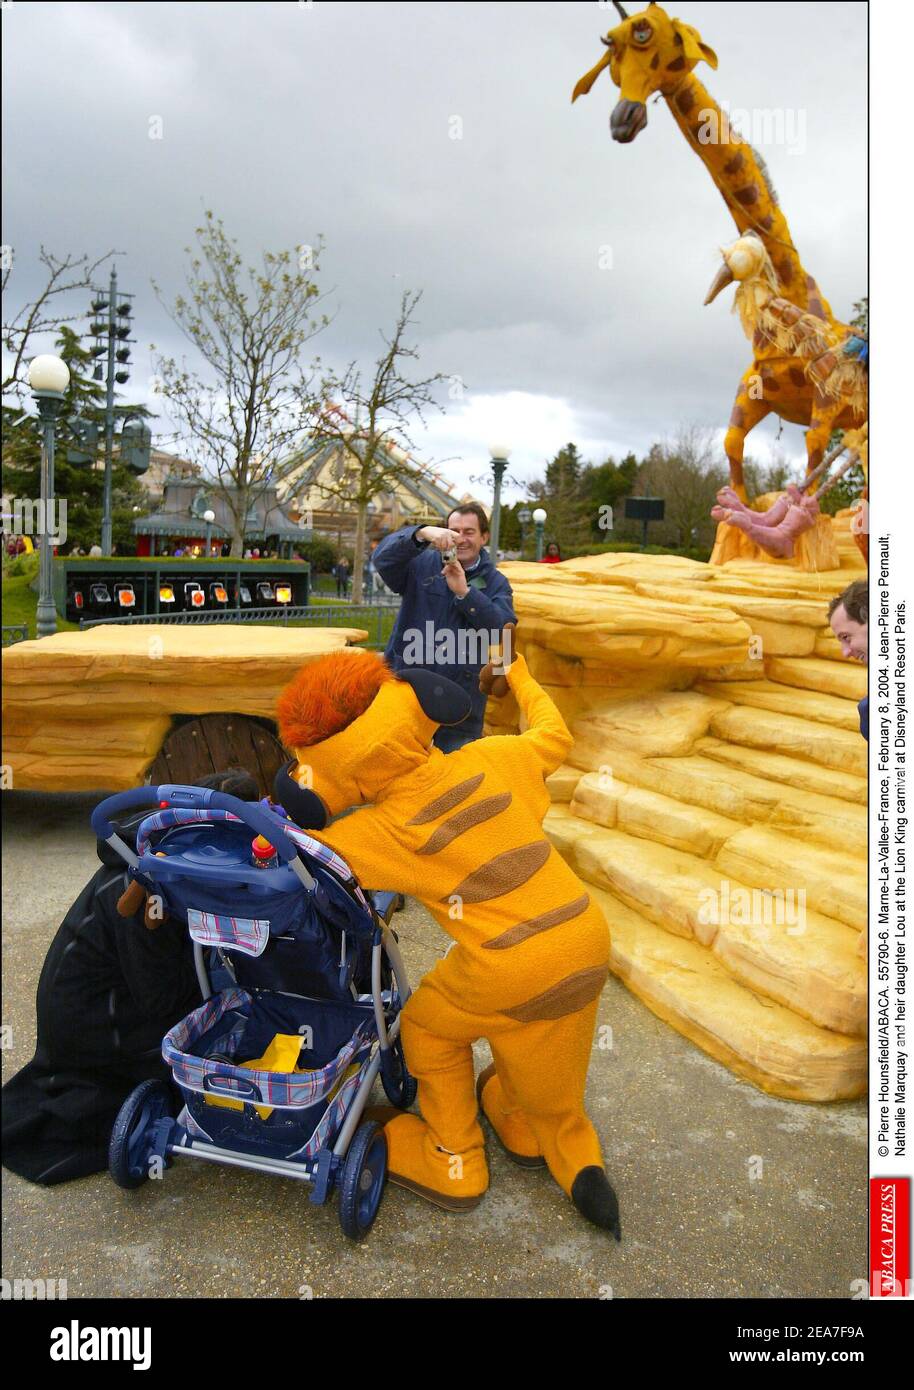 © Pierre Hounsfield/ABACA. 55790-6. Marne-La-Vallee-France, February 8, 2004. Jean-Pierre Pernaut, Nathalie Marquay and their daughter Lou at the Lion King carnival at Disneyland Resort Paris. Stock Photo